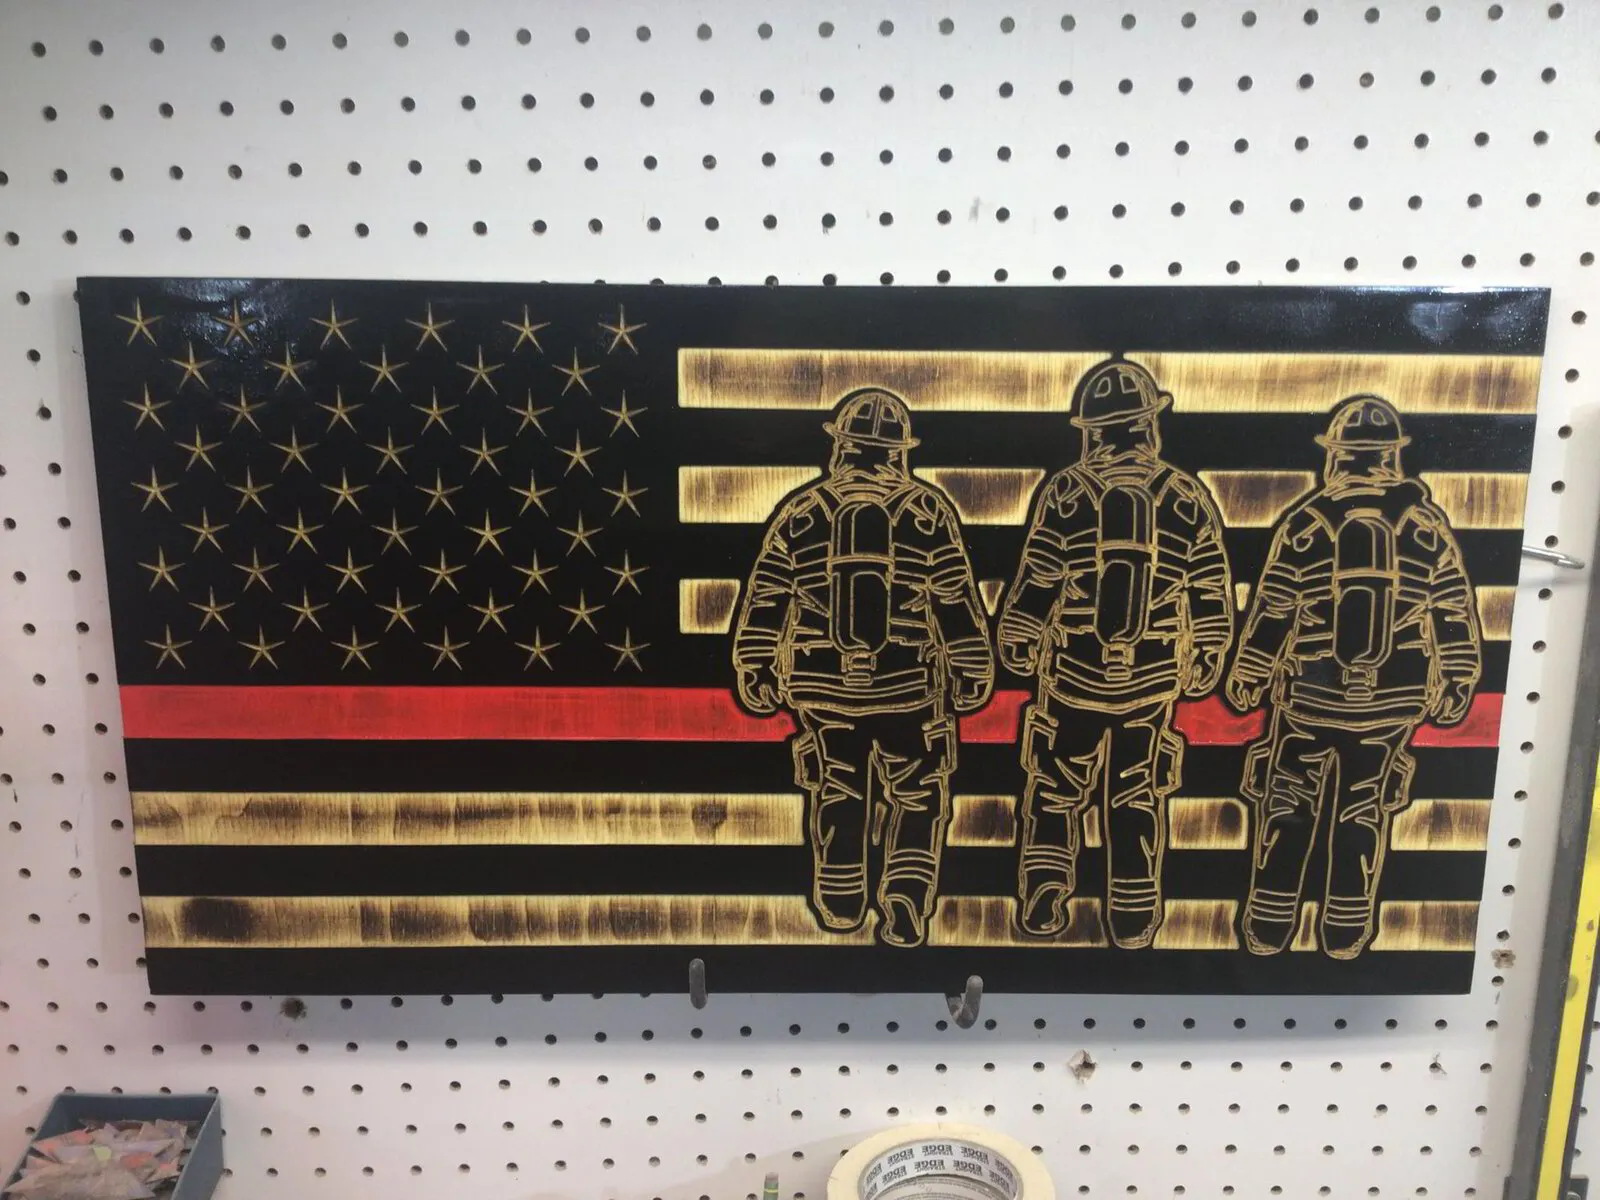  3 Firefighters Red Thin Line Flag 13 X 24.75